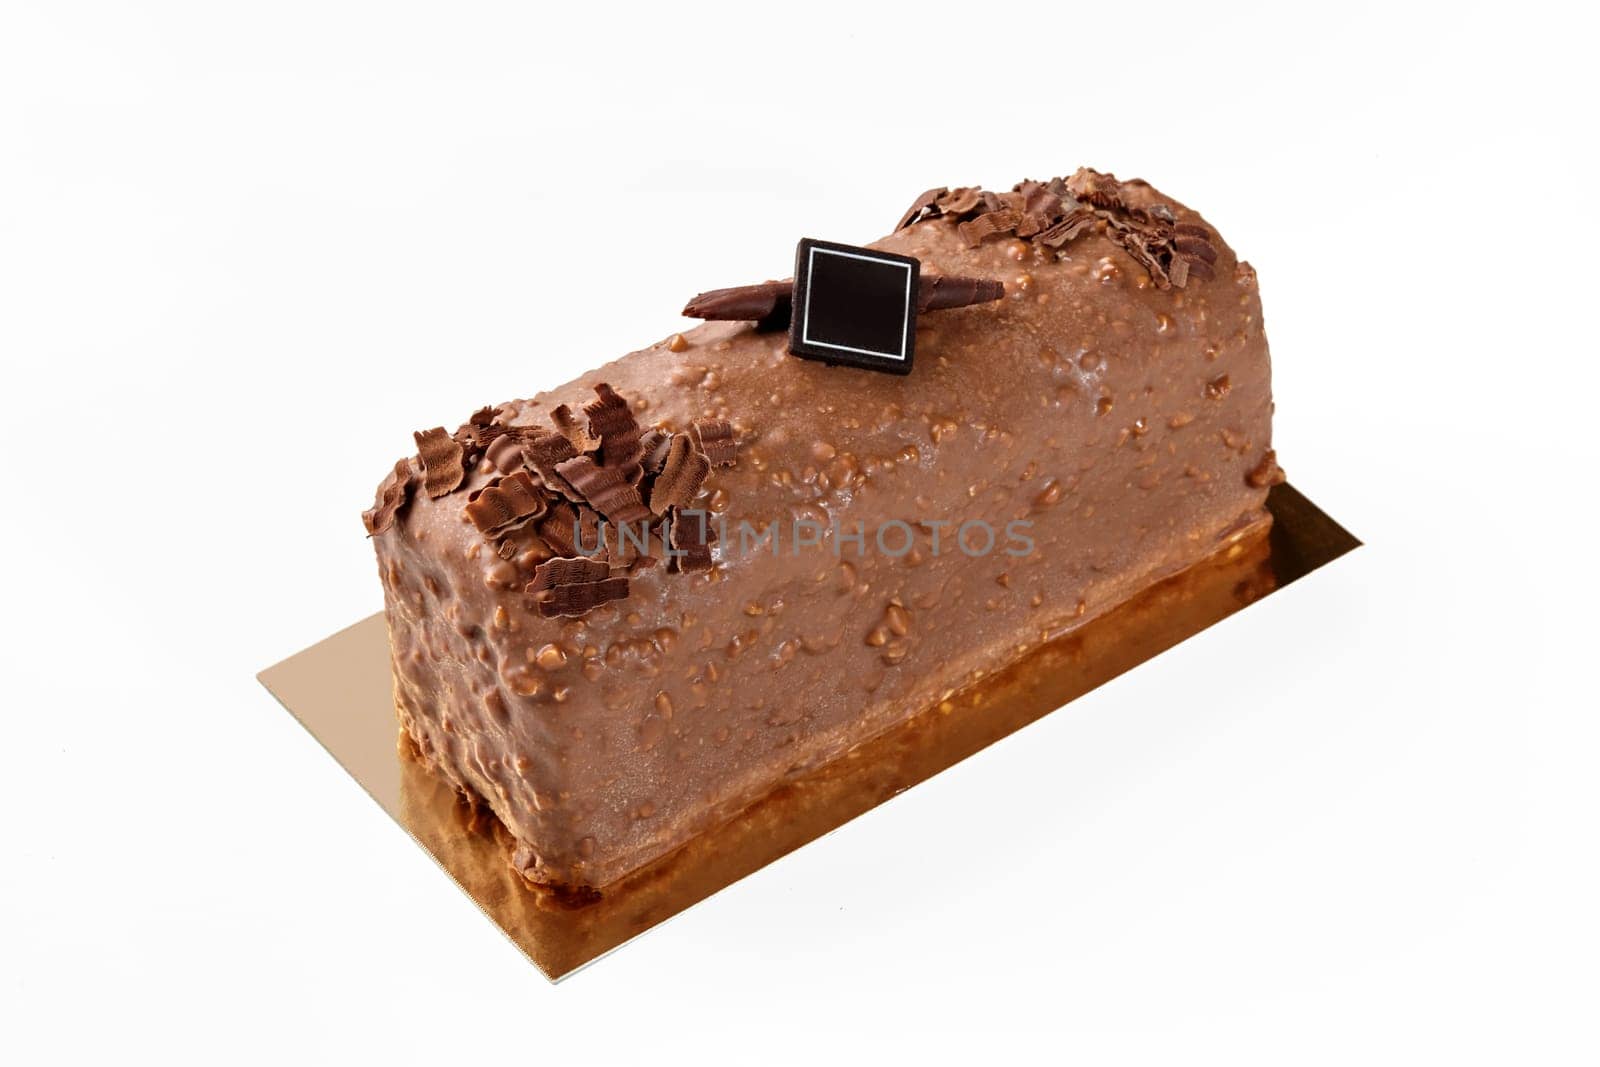 Delicious artisanal loaf cake coated with milk chocolate and nuts glaze, decorated with dark chocolate branding plaque on golden cardboard, isolated on white. Sweet pastries concept